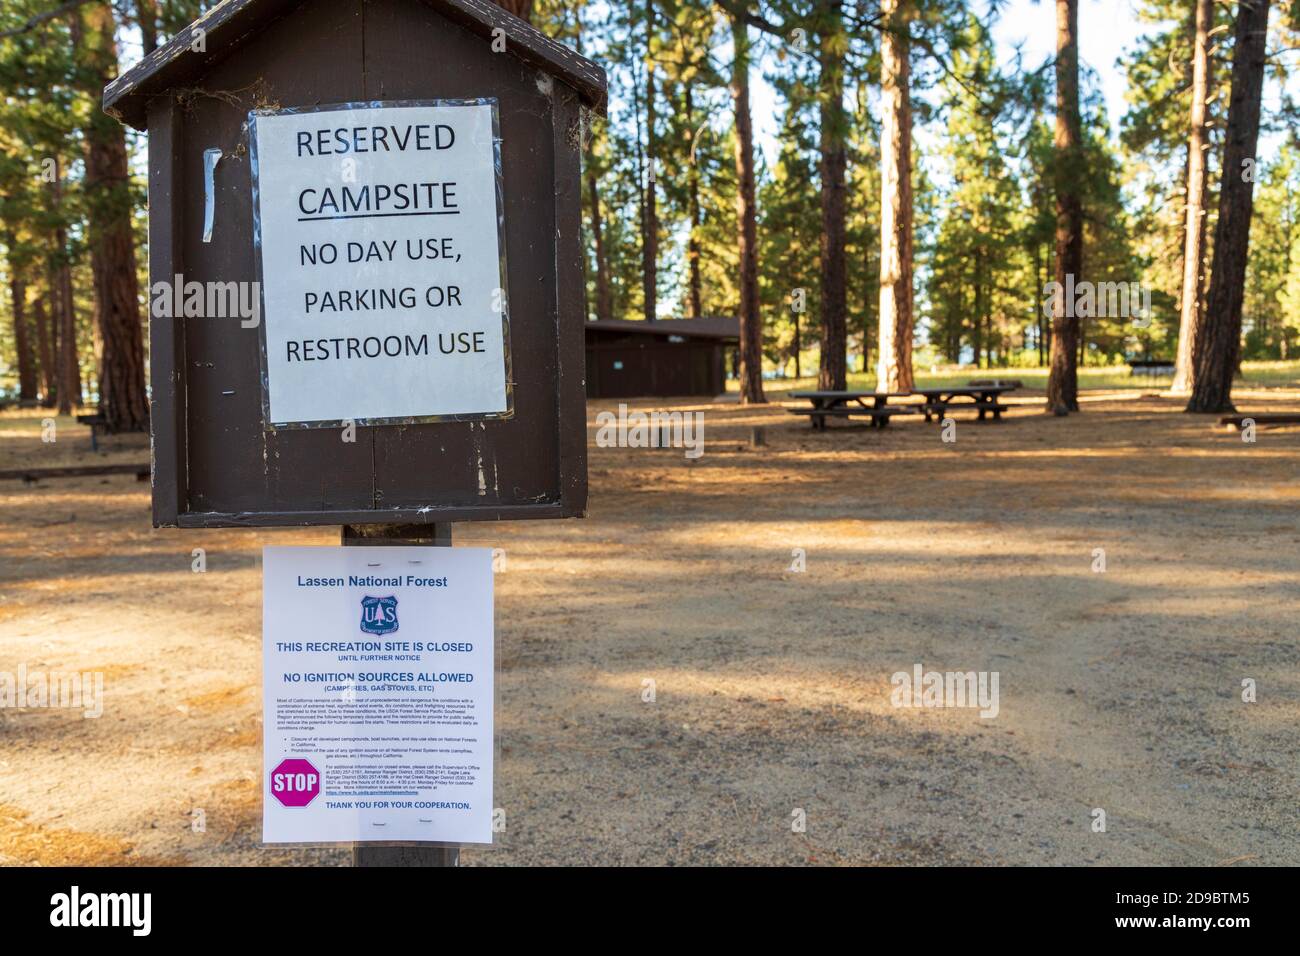 SUSANVILLE CALIFORNIA - SEPTEMBER 8, 2020 - Closure sign at deserted Eagle Lake campground pursuant to Forest Service order to close forest access. Stock Photo